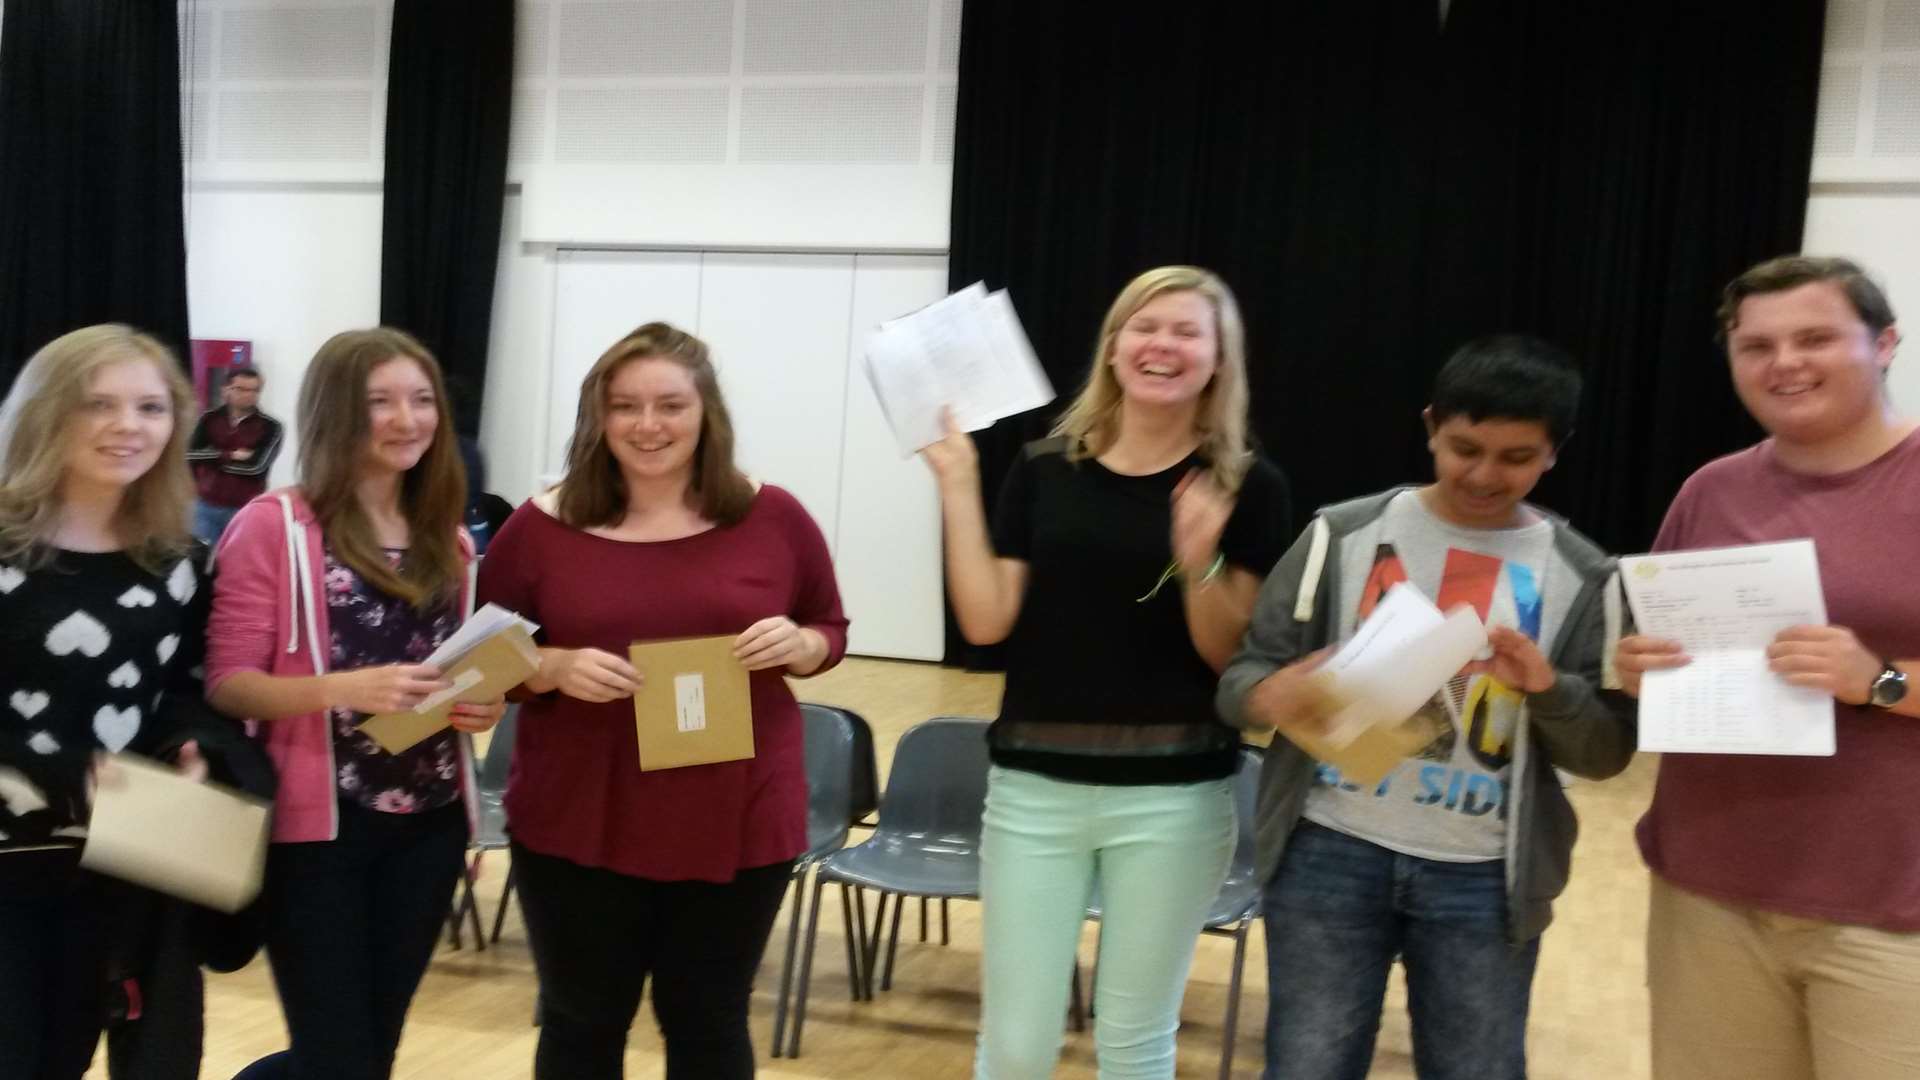 Pupils from The Ellington and Hereson School open their results